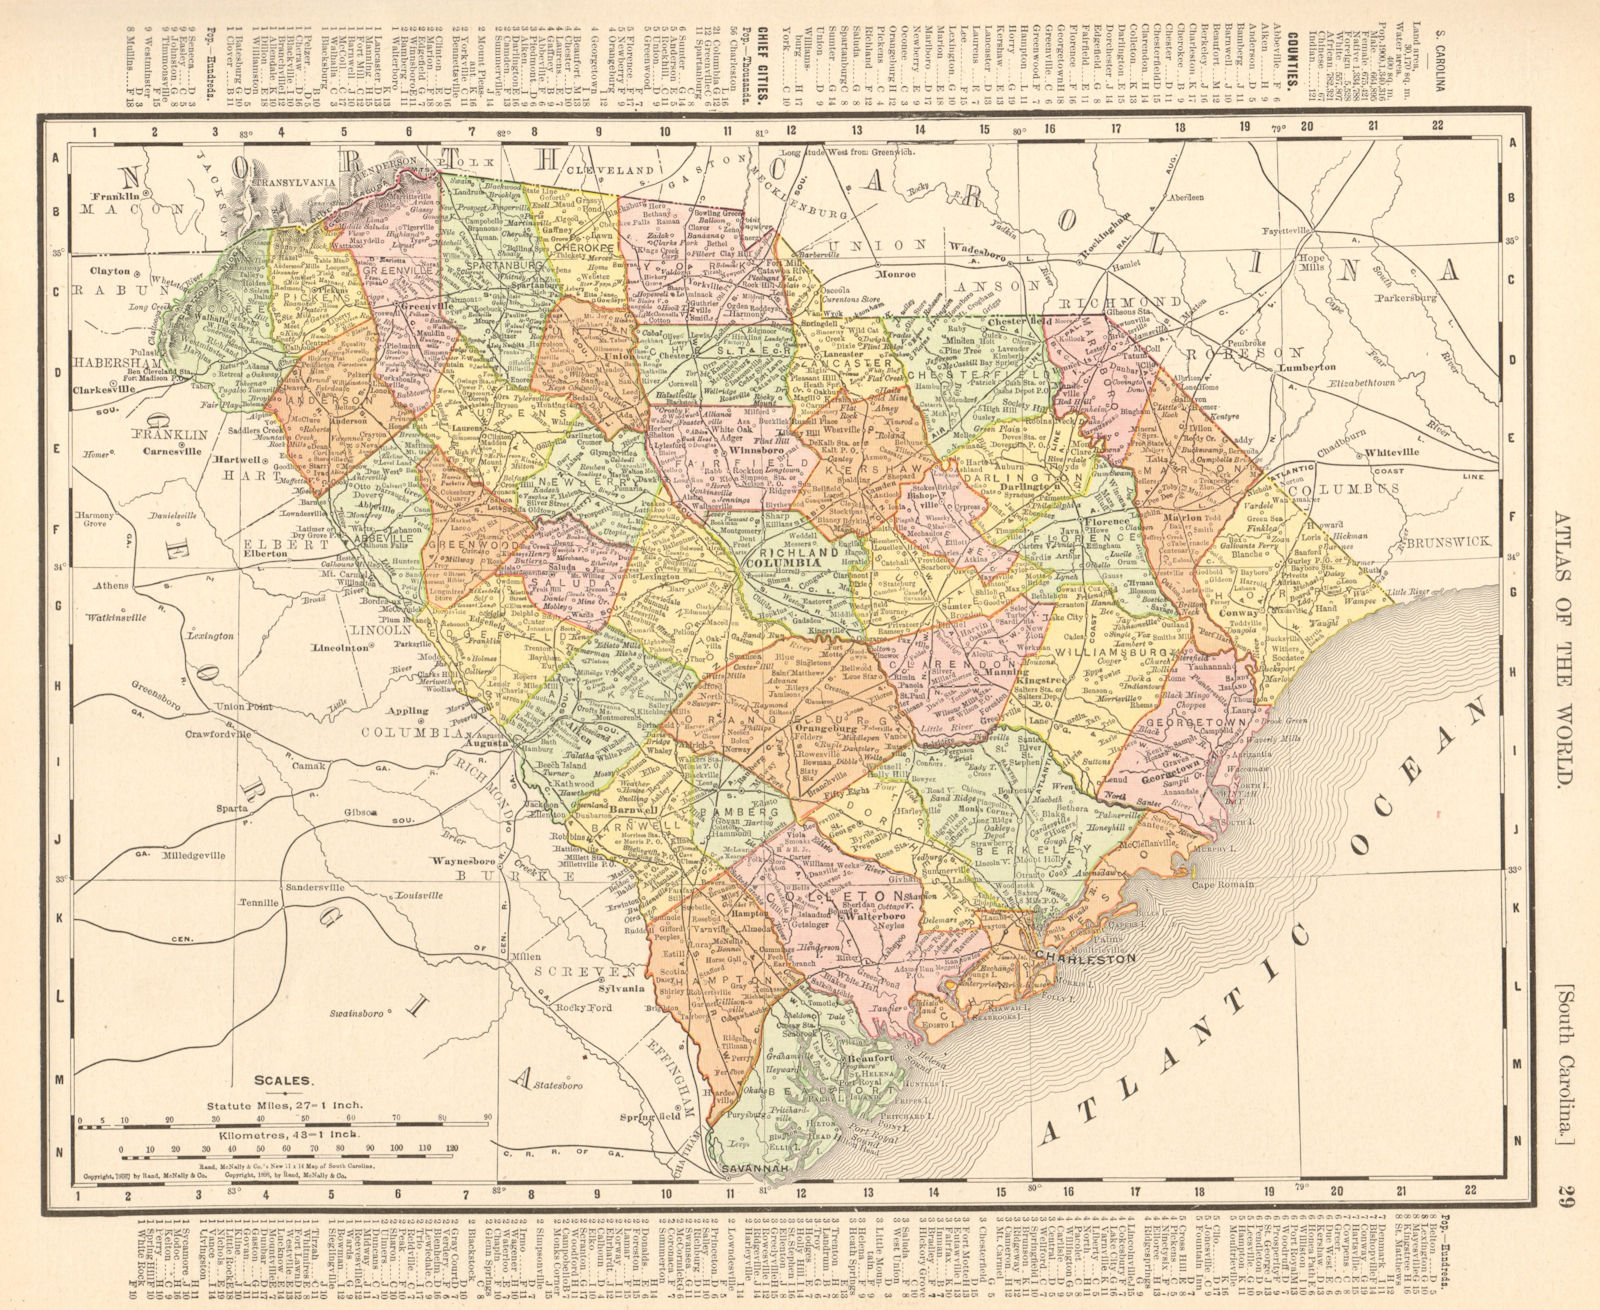 South Carolina state map showing counties. RAND MCNALLY 1906 old antique